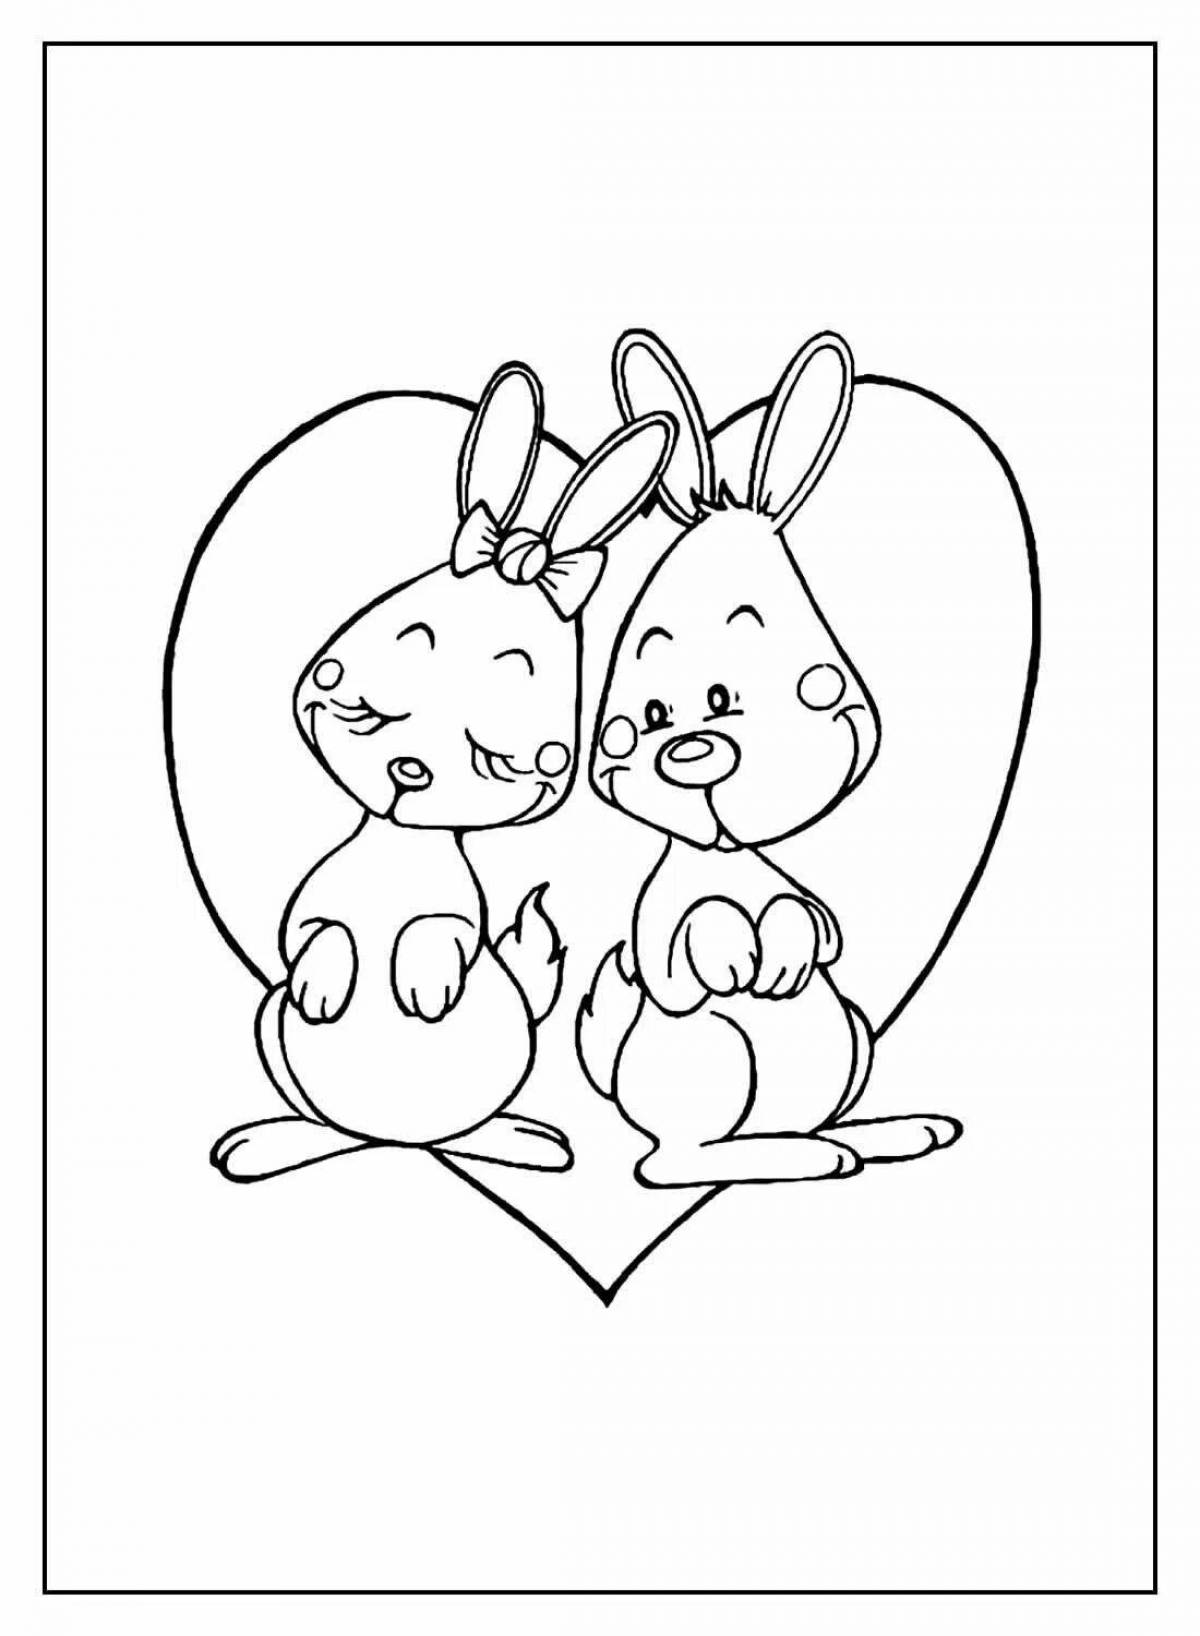 Coloring live bear and rabbit